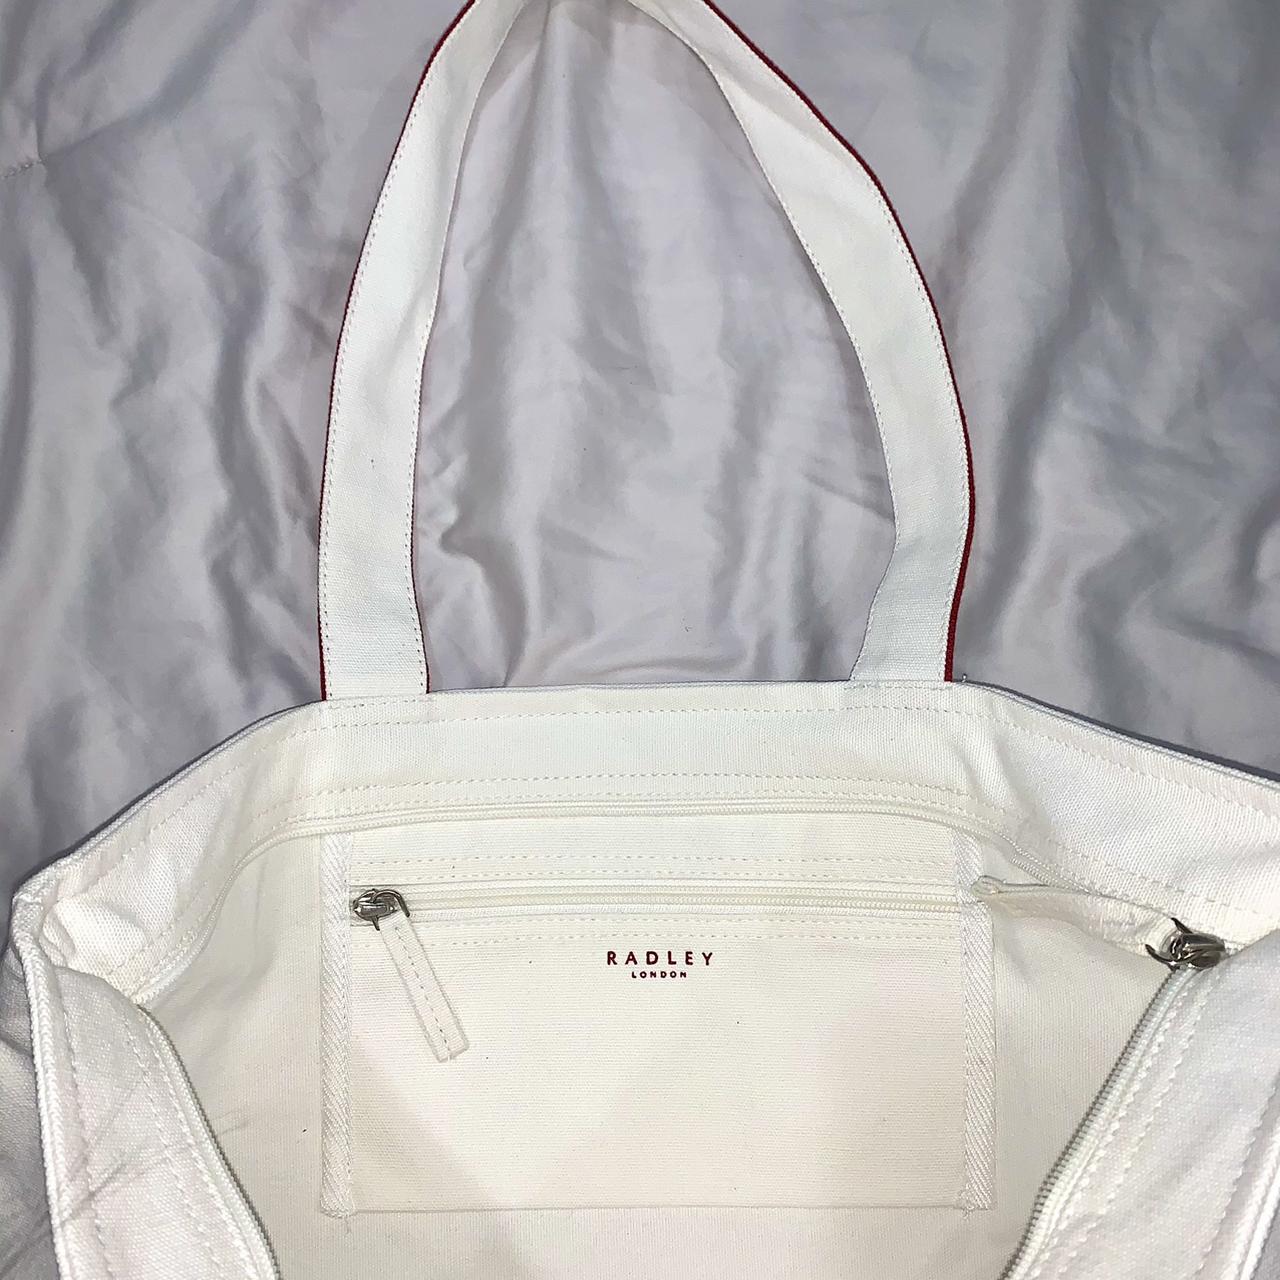 Radley Women's White and Red Bag (2)